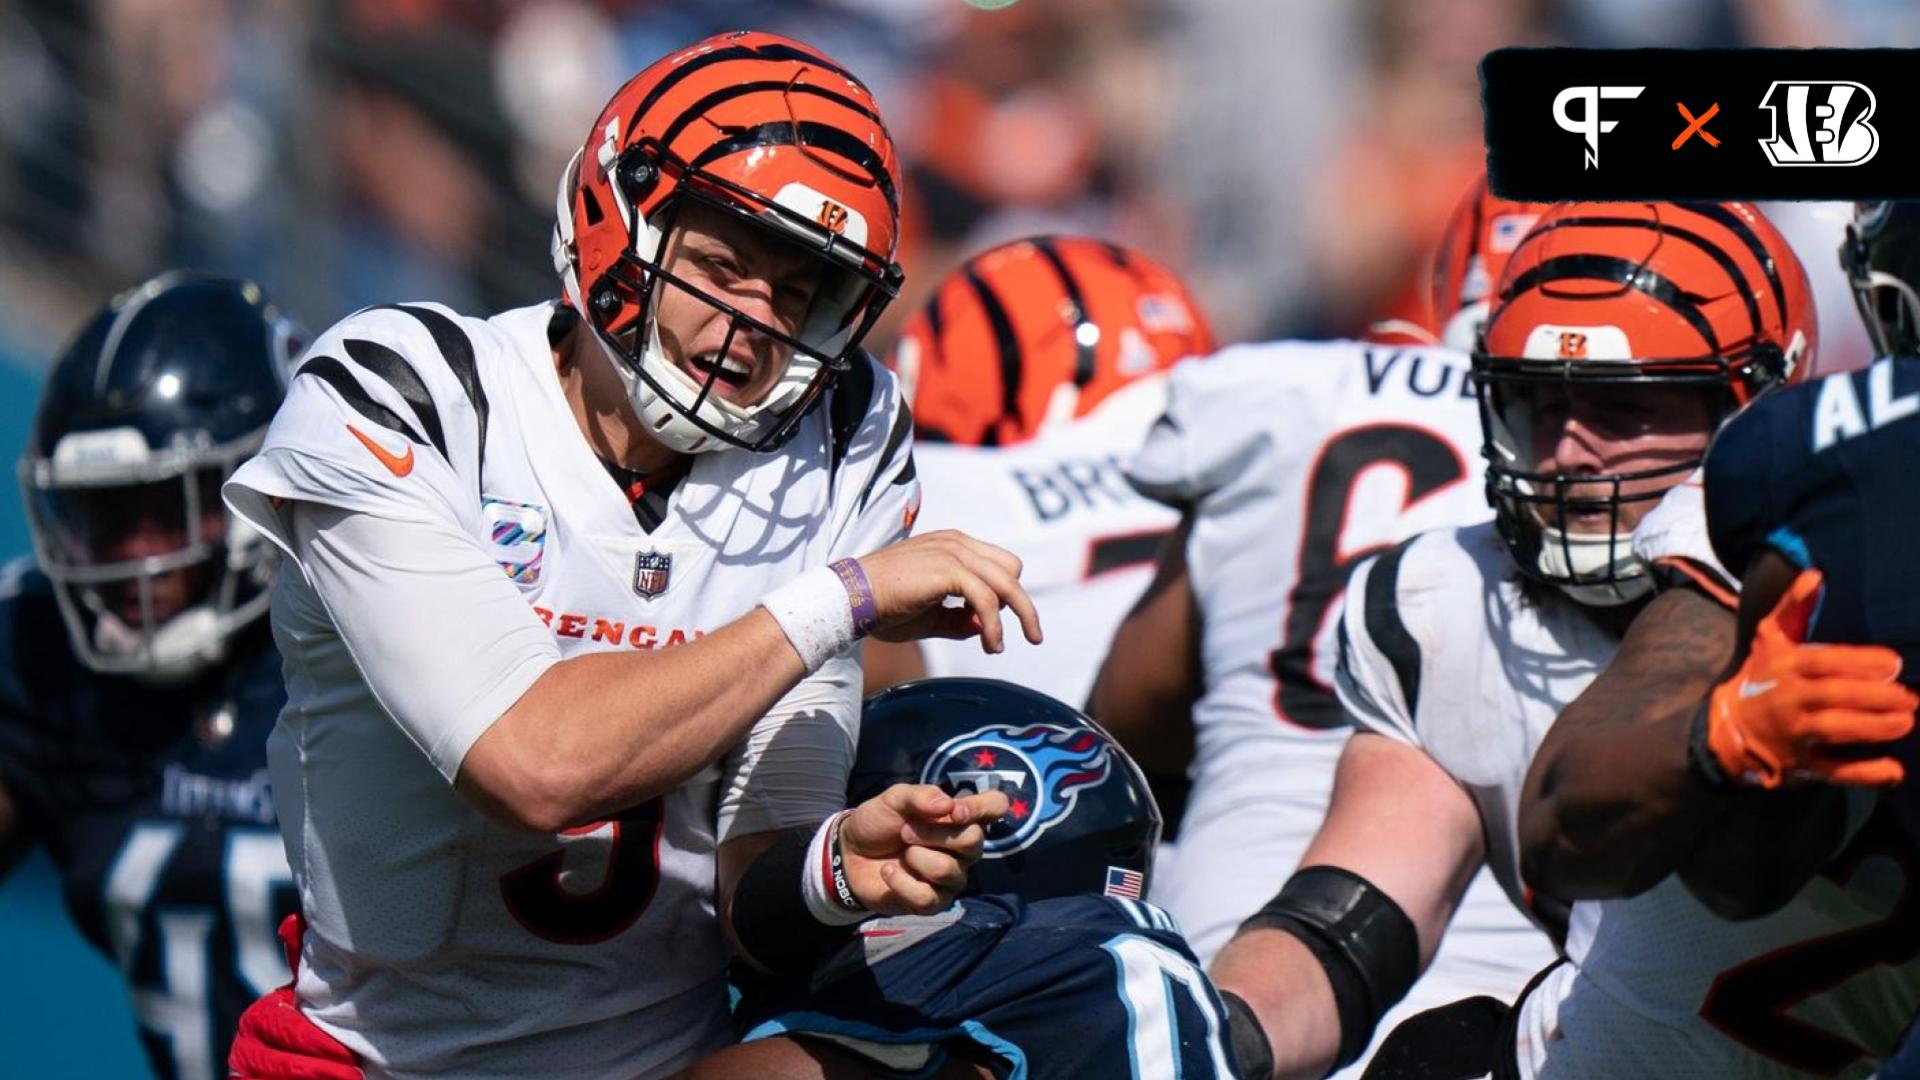 Bengals overcome sluggish offensive start and loss of two wide